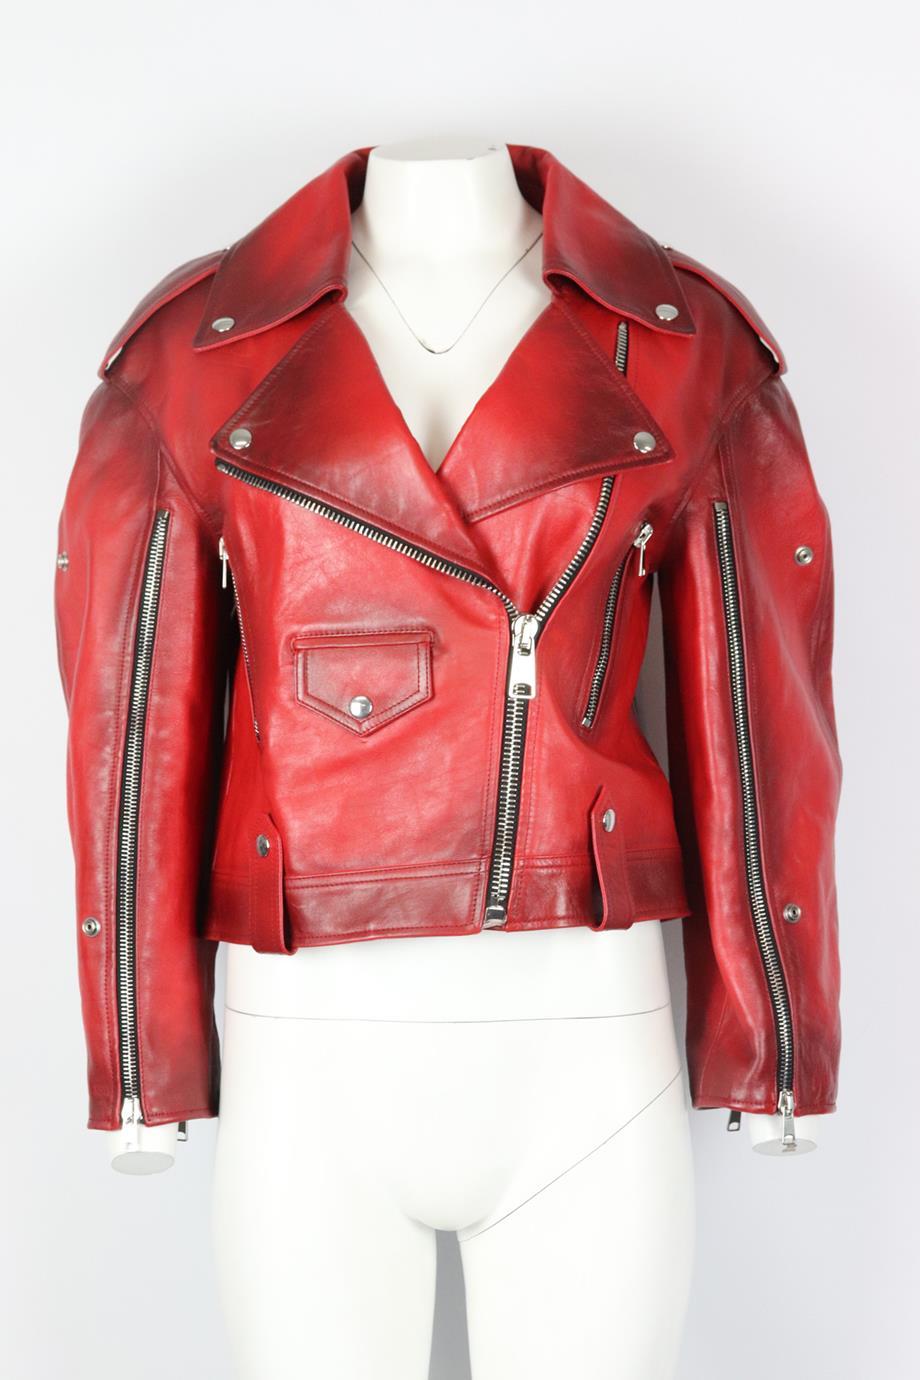 Alexander McQueen leather biker jacket. Red. Long sleeve, v-neck. Zip fastening at front. 100% Leather; lining: 100% viscose. Size: IT 42 (UK 10, US 6, FR 38). Shoulder to shoulder: 19 in. Bust: 40 in. Waist: 38 in. Hips: 40 in. Length: 20 in. Very